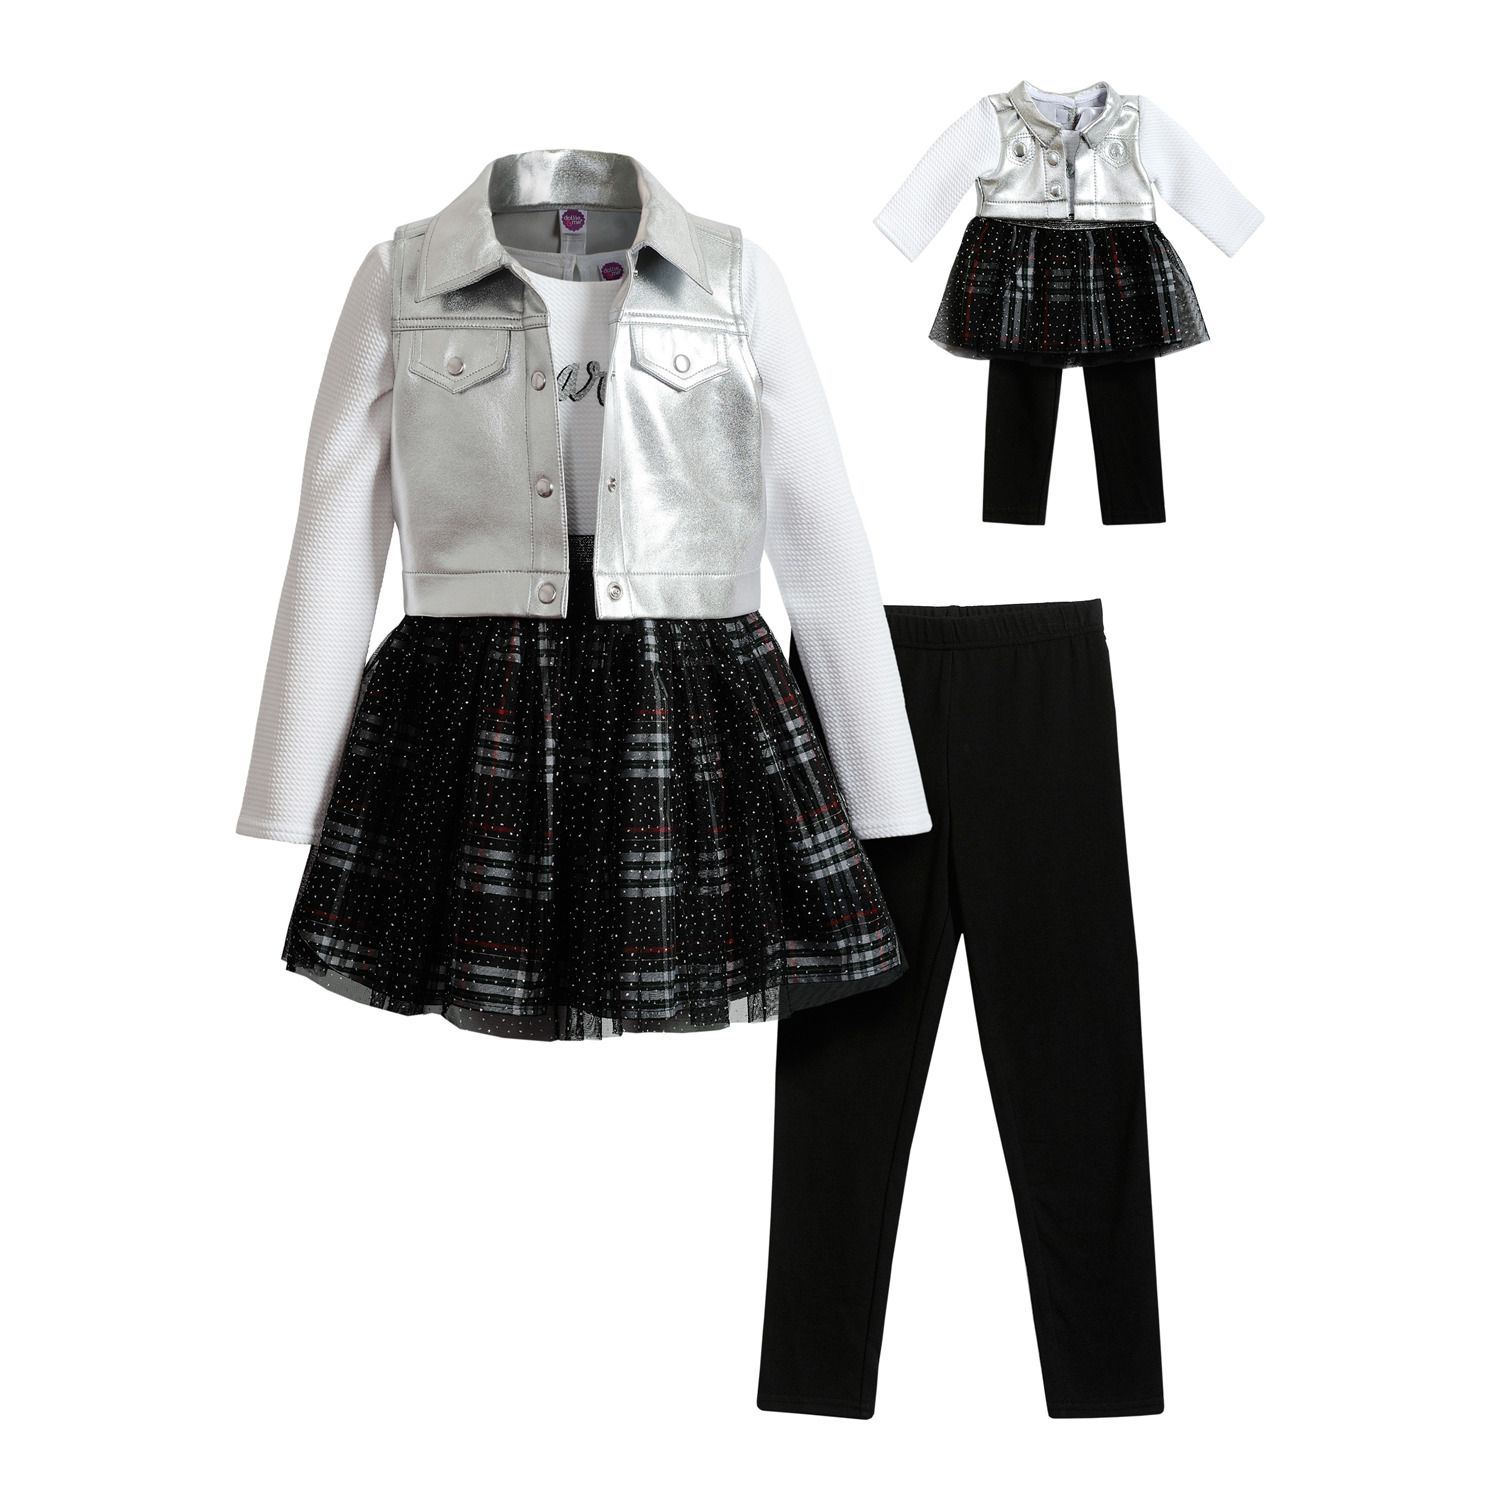 dollie and me outfit